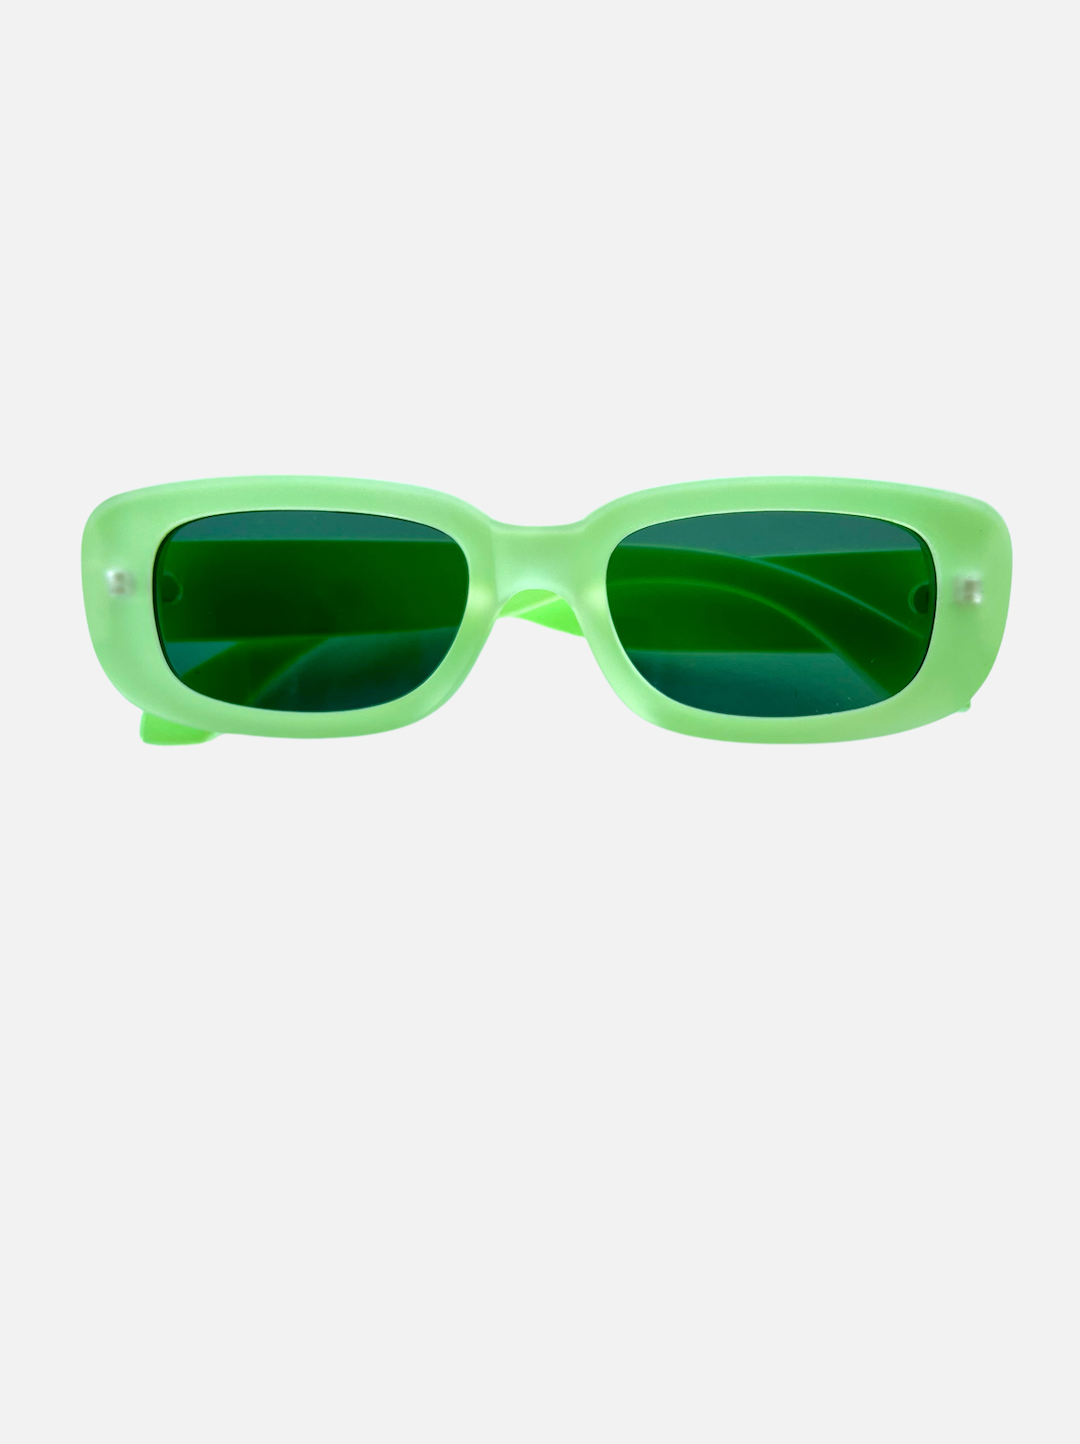 A pair of kids' sunglasses with blue lenses inside mint green frames